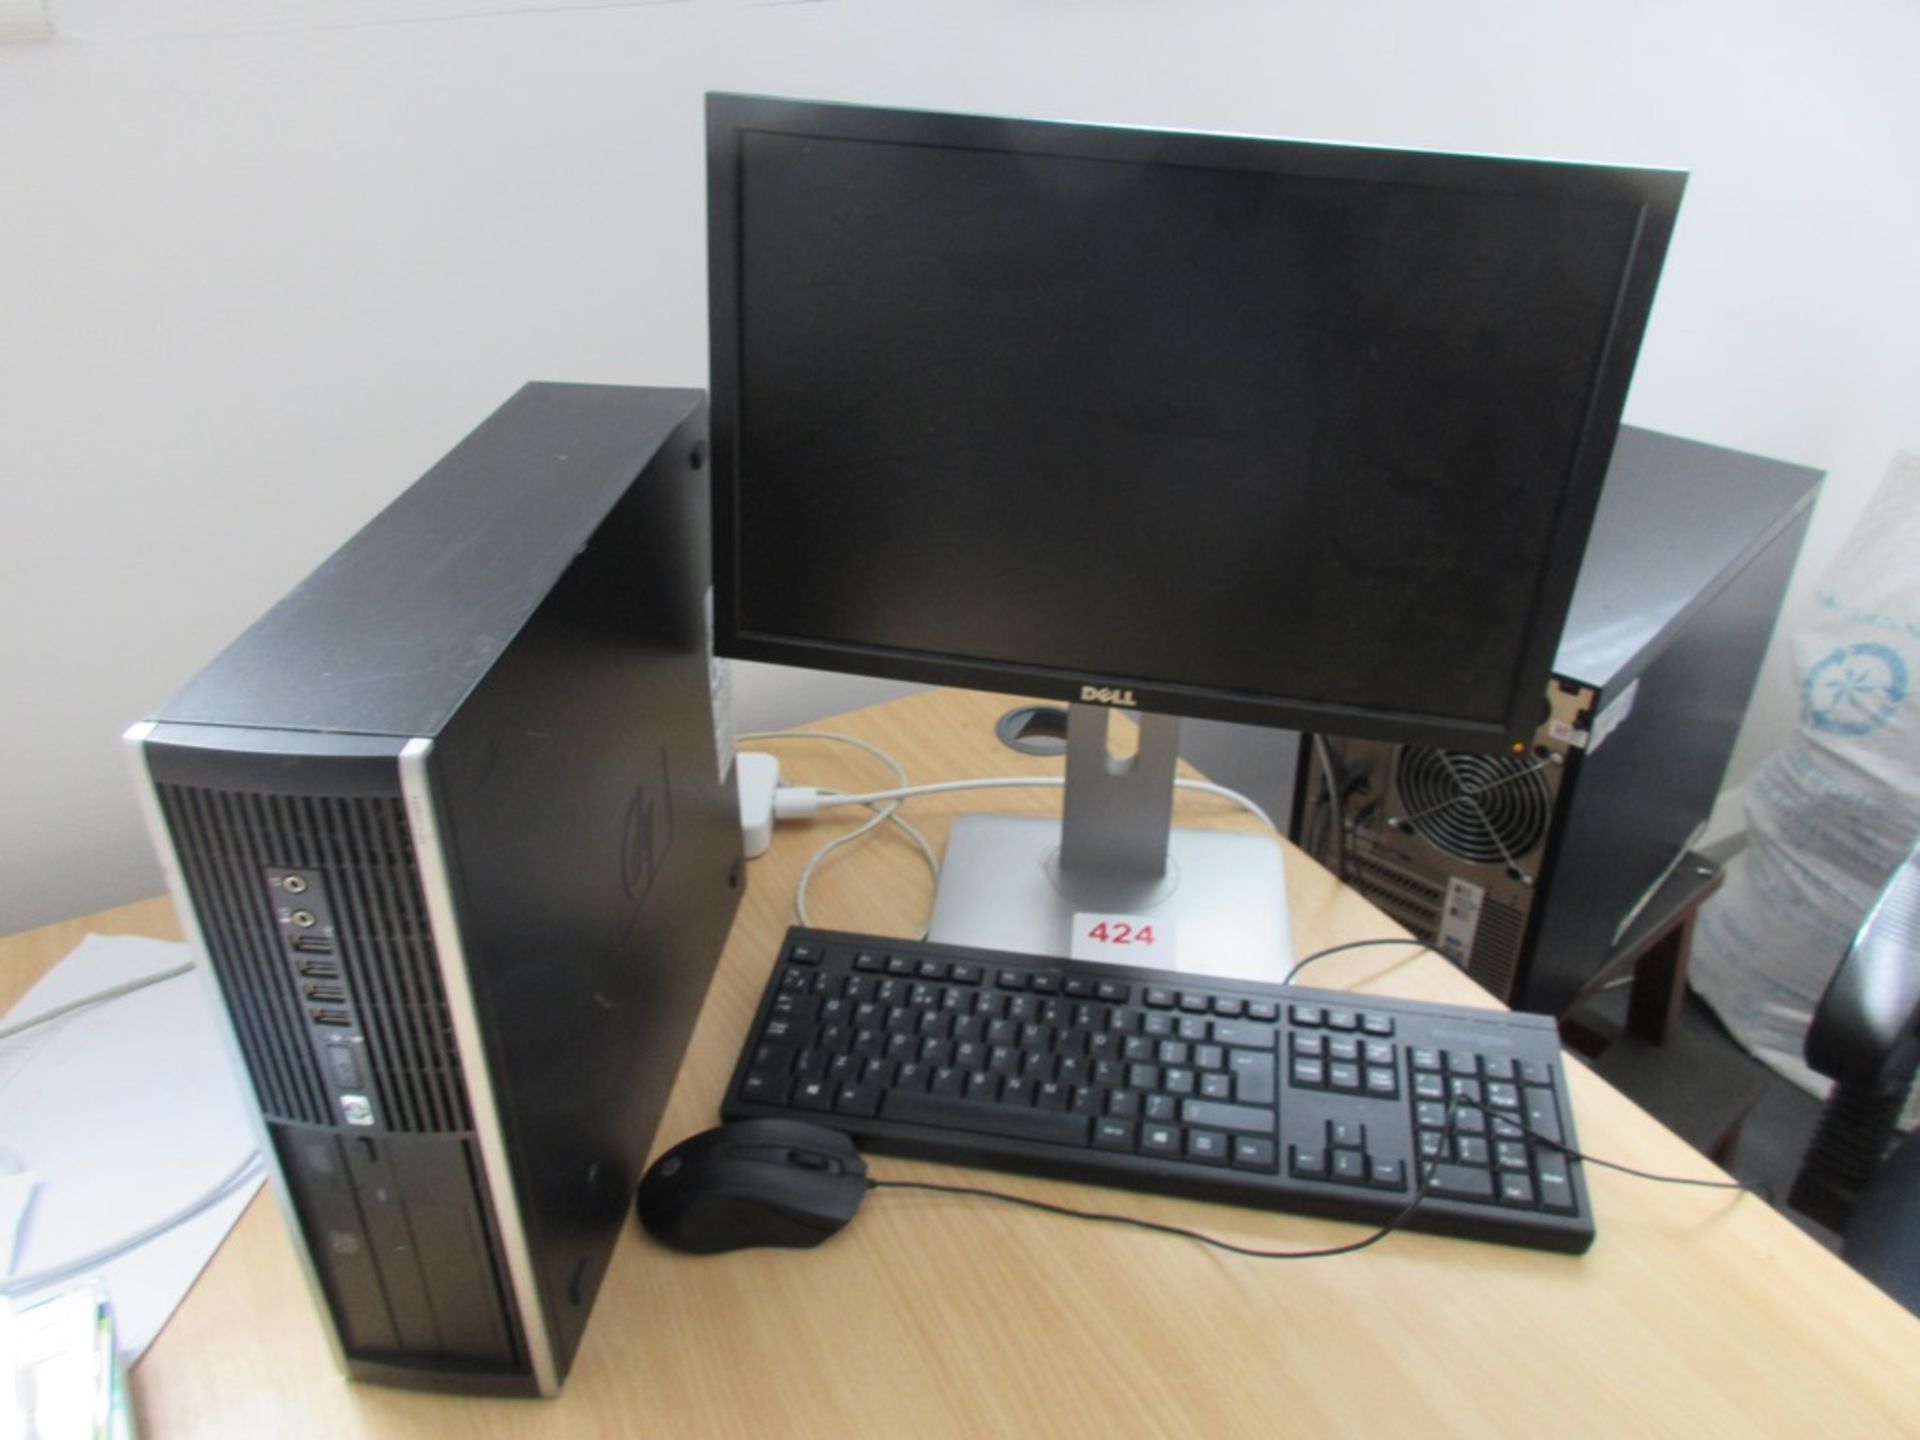 HP Compaq Computer system with HP Deskjet 3050 printer, Dell flat screen monitor, keyboard, mouse